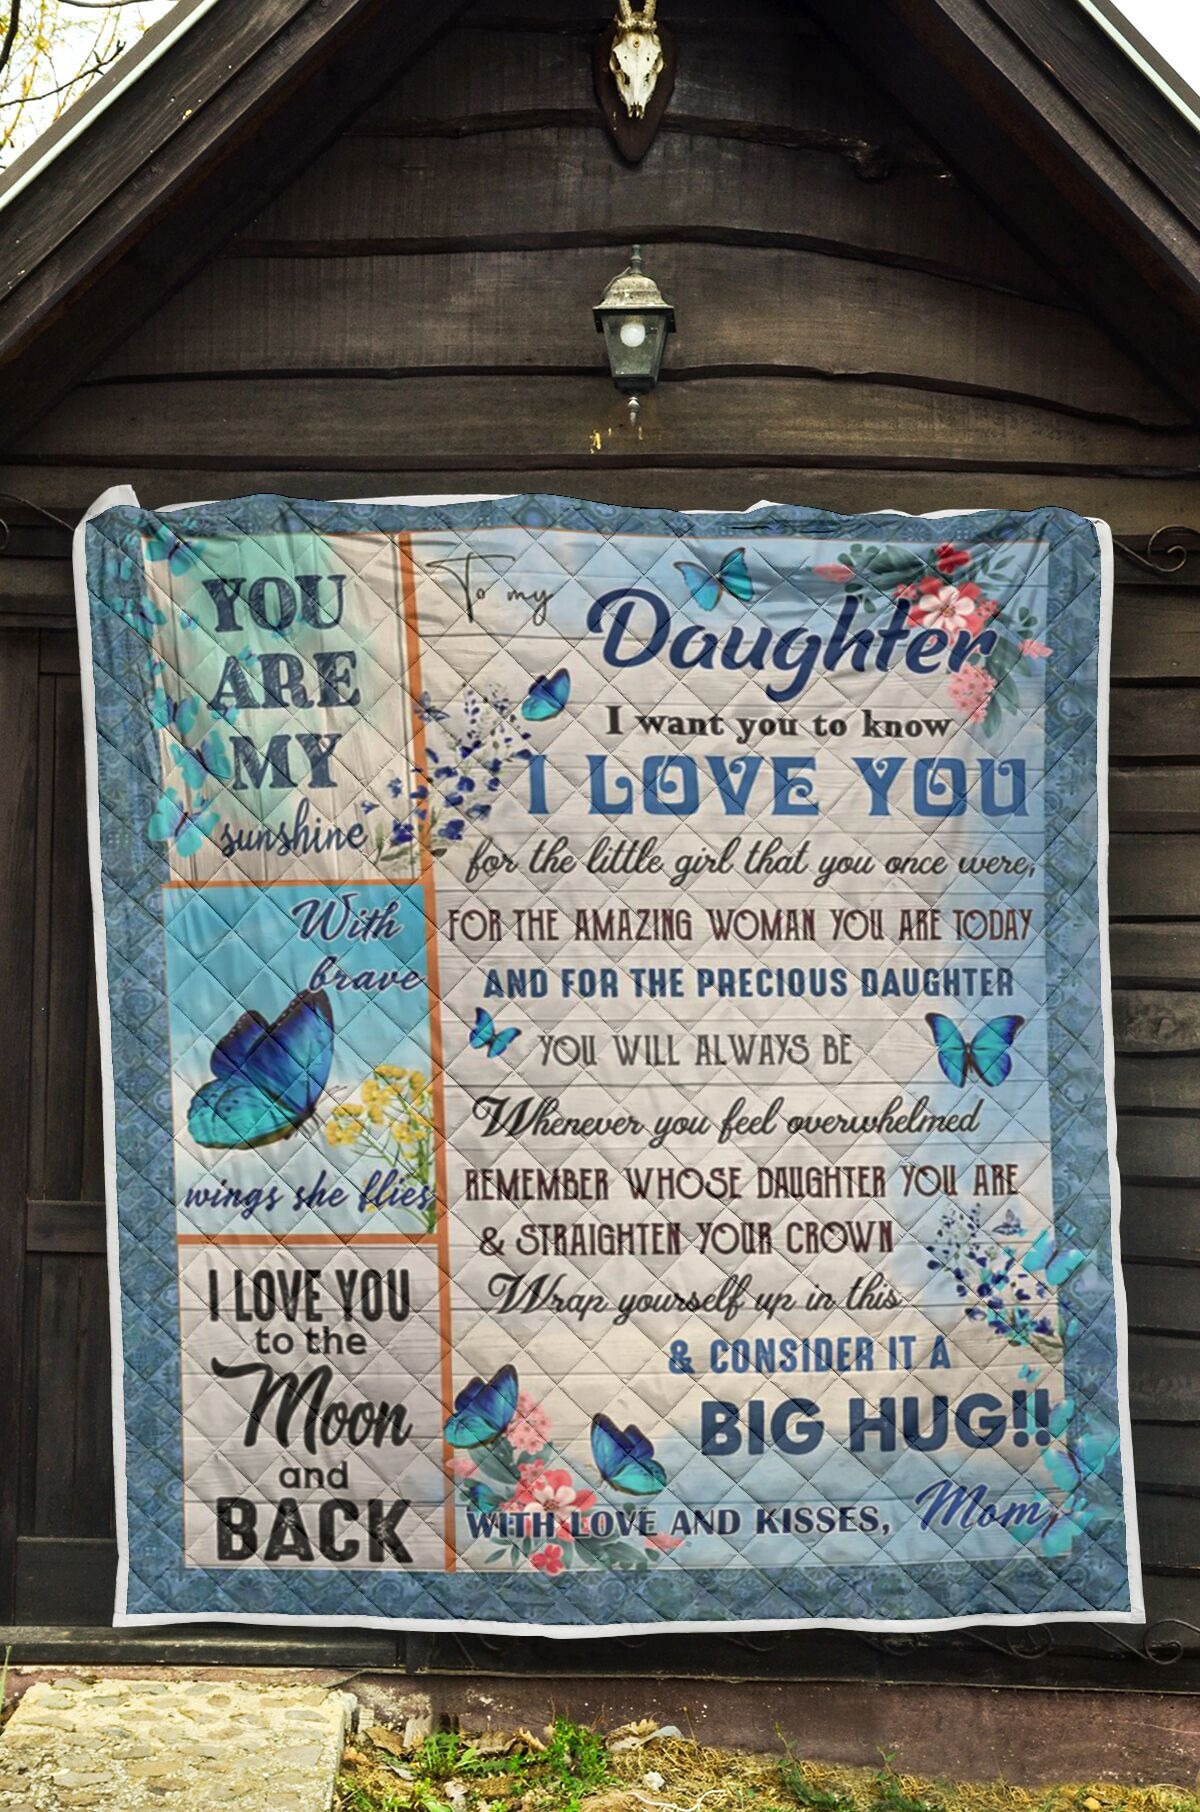 To my DaughterI want you to know I love you QUILT4